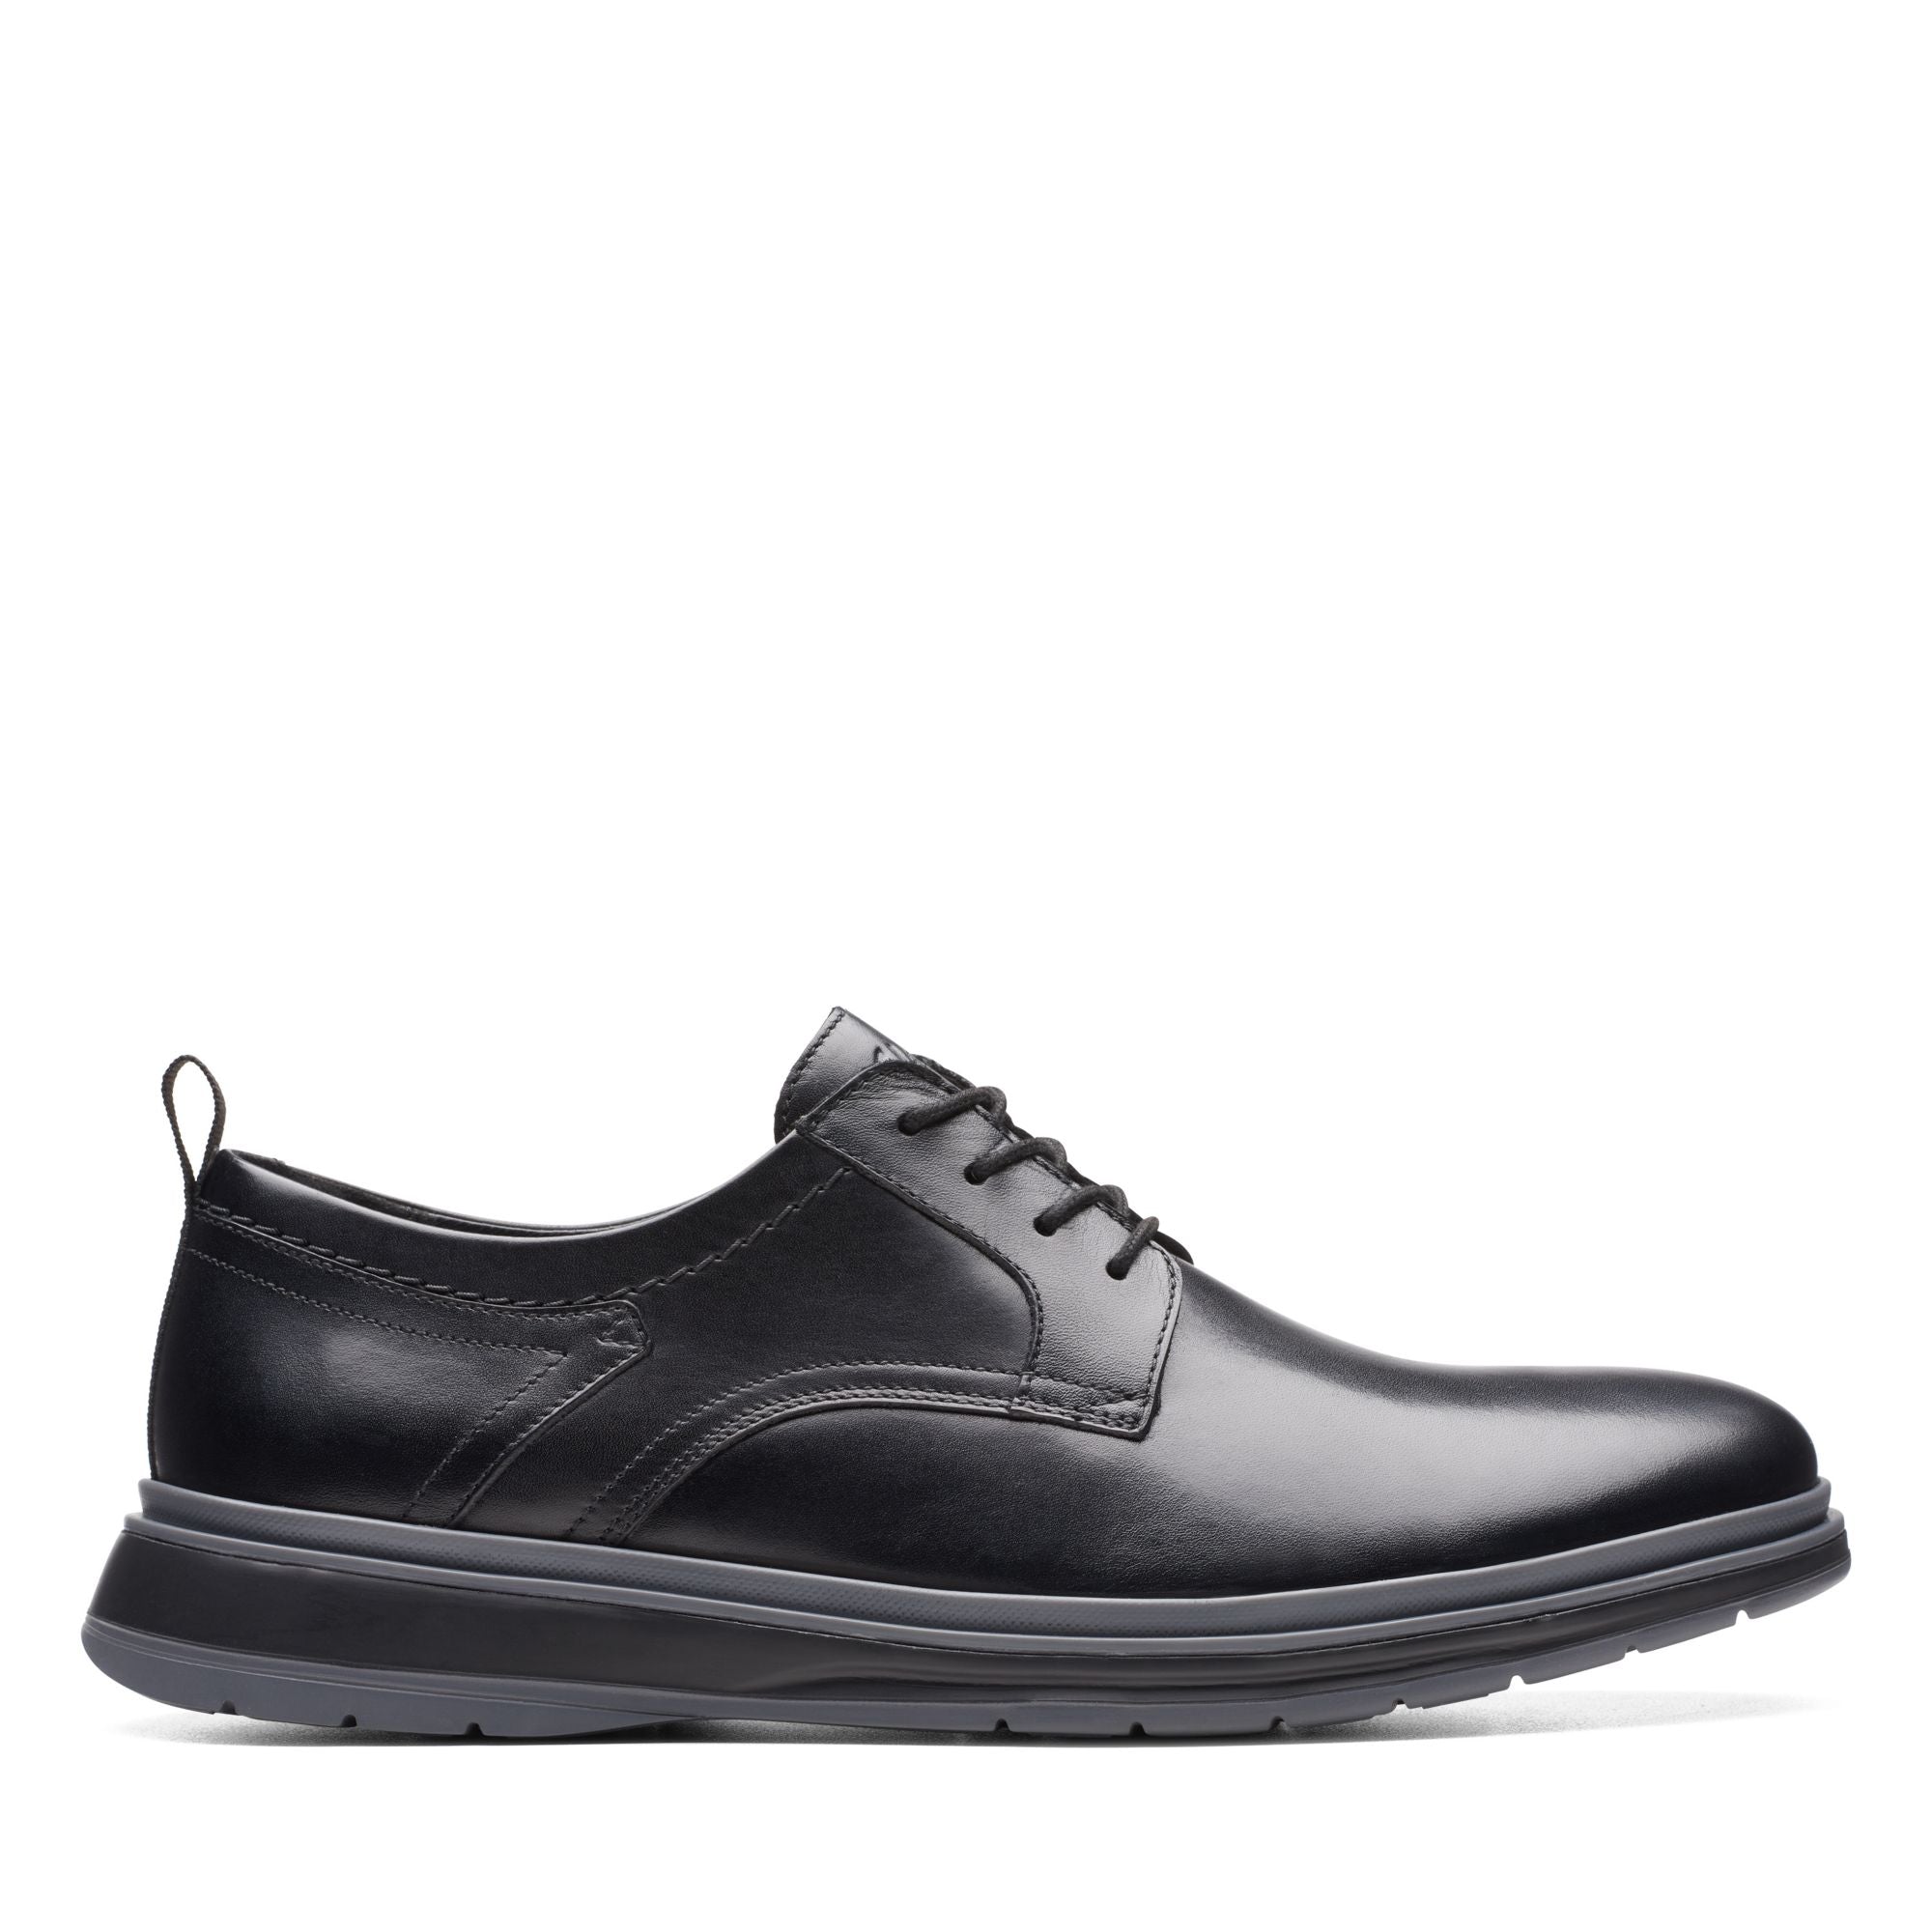 Chantry Lo Black Leather - Clarks Canada Official Site | Clarks Shoes